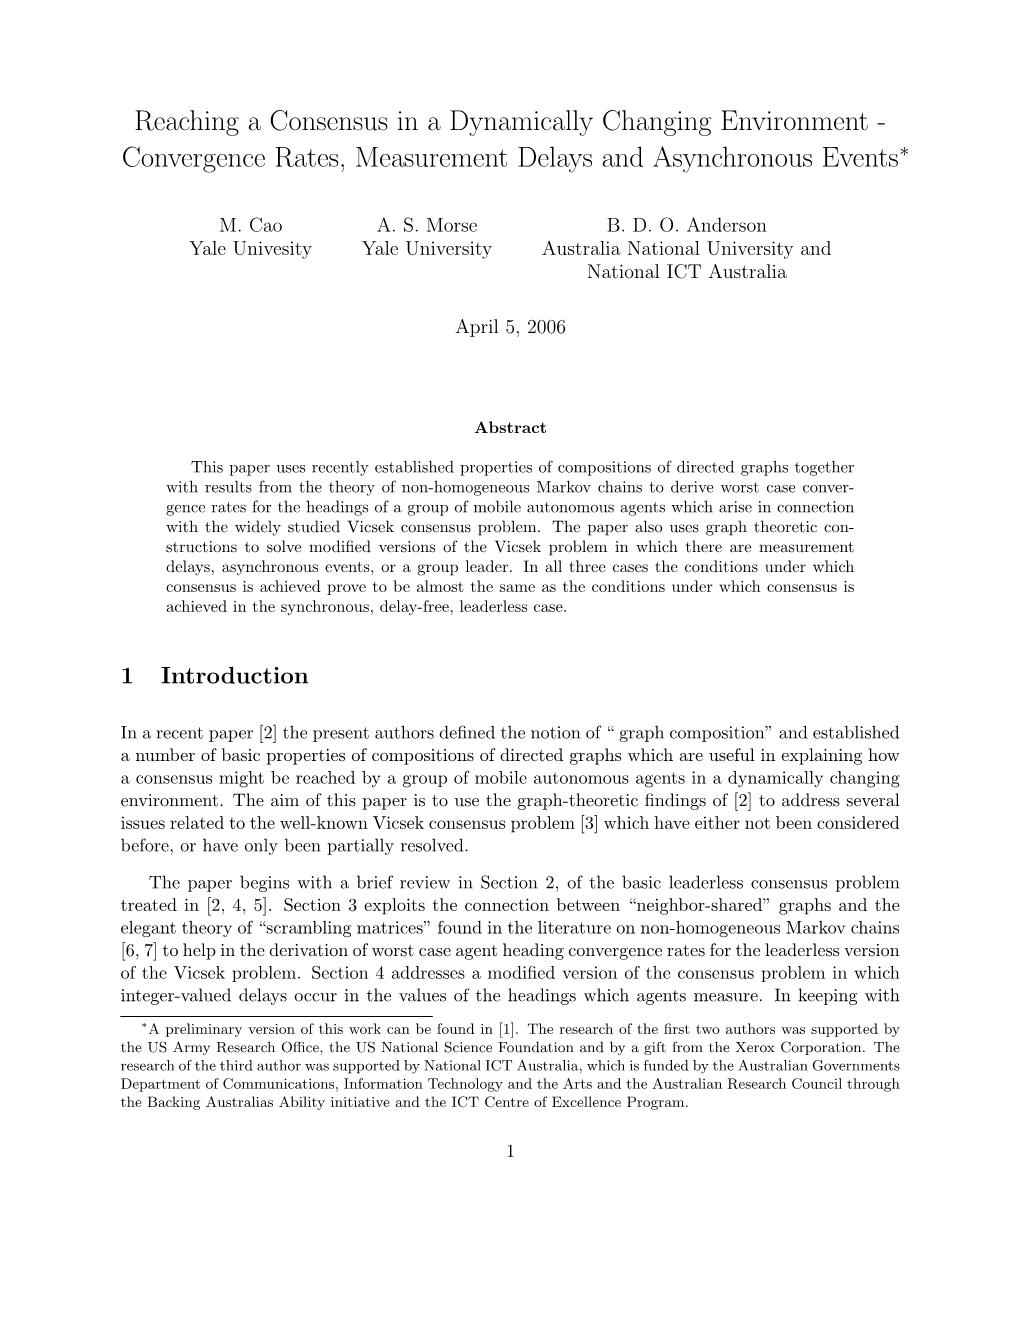 Convergence Rates, Measurement Delays and Asynchronous Events∗